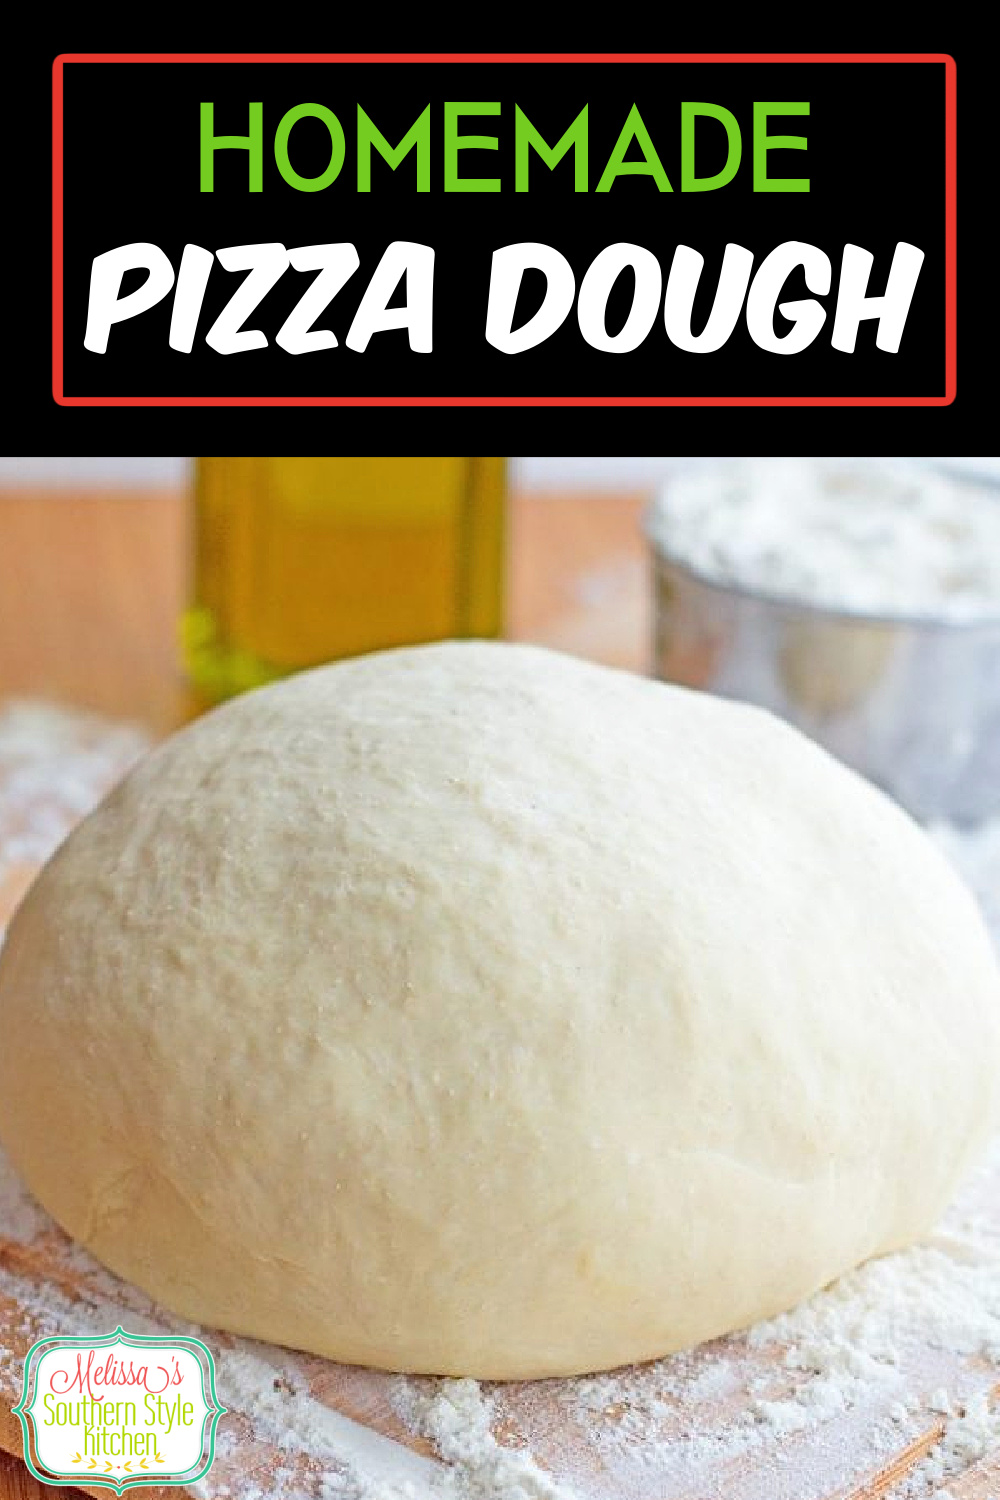 Set up a toppings bar and let everyone build their own pizza using this Homemade Pizza Dough #pizzadough #pizza #pizzarecipes #bestpizzadoughrecipe #homemadepizzadough via @melissasssk